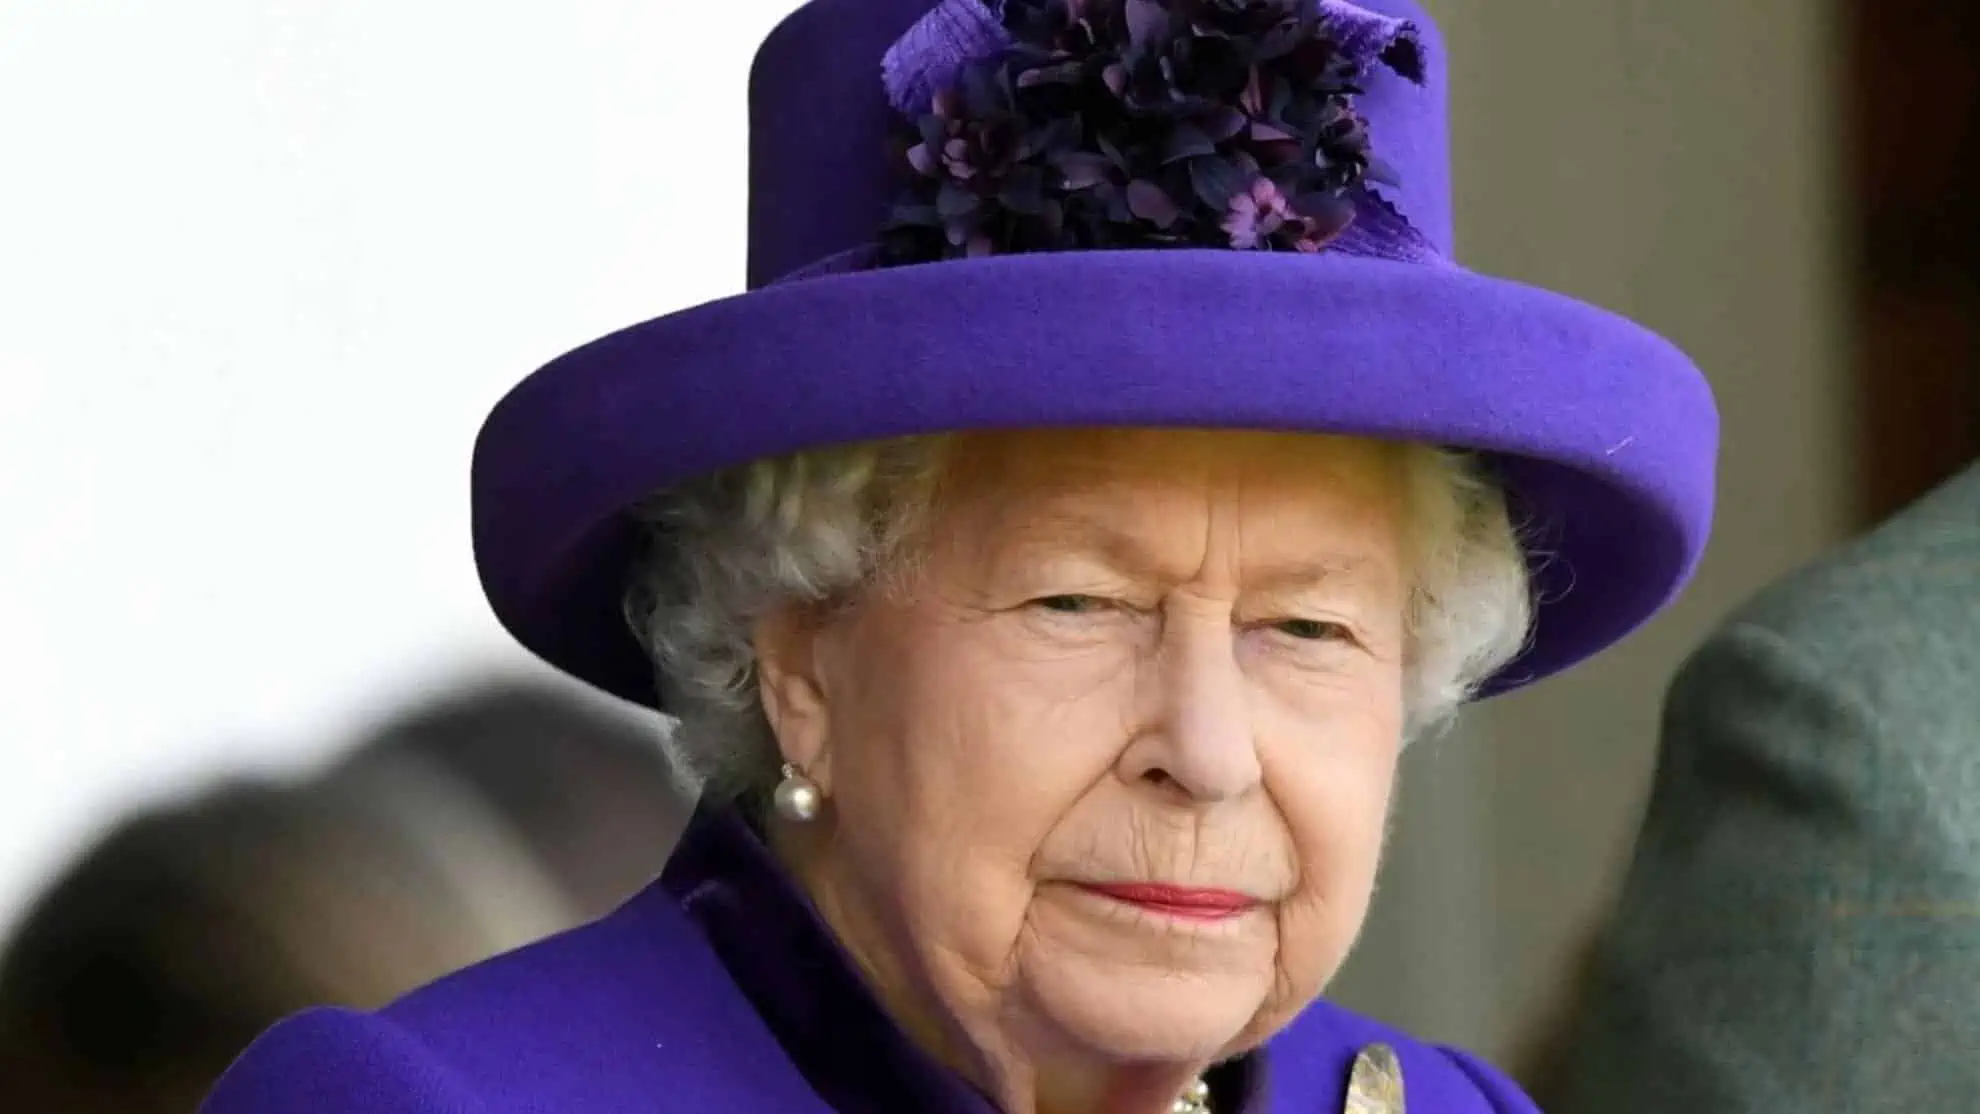 Phish campaign uses the Queen’s death to gather MS account, multi-factor authentication details